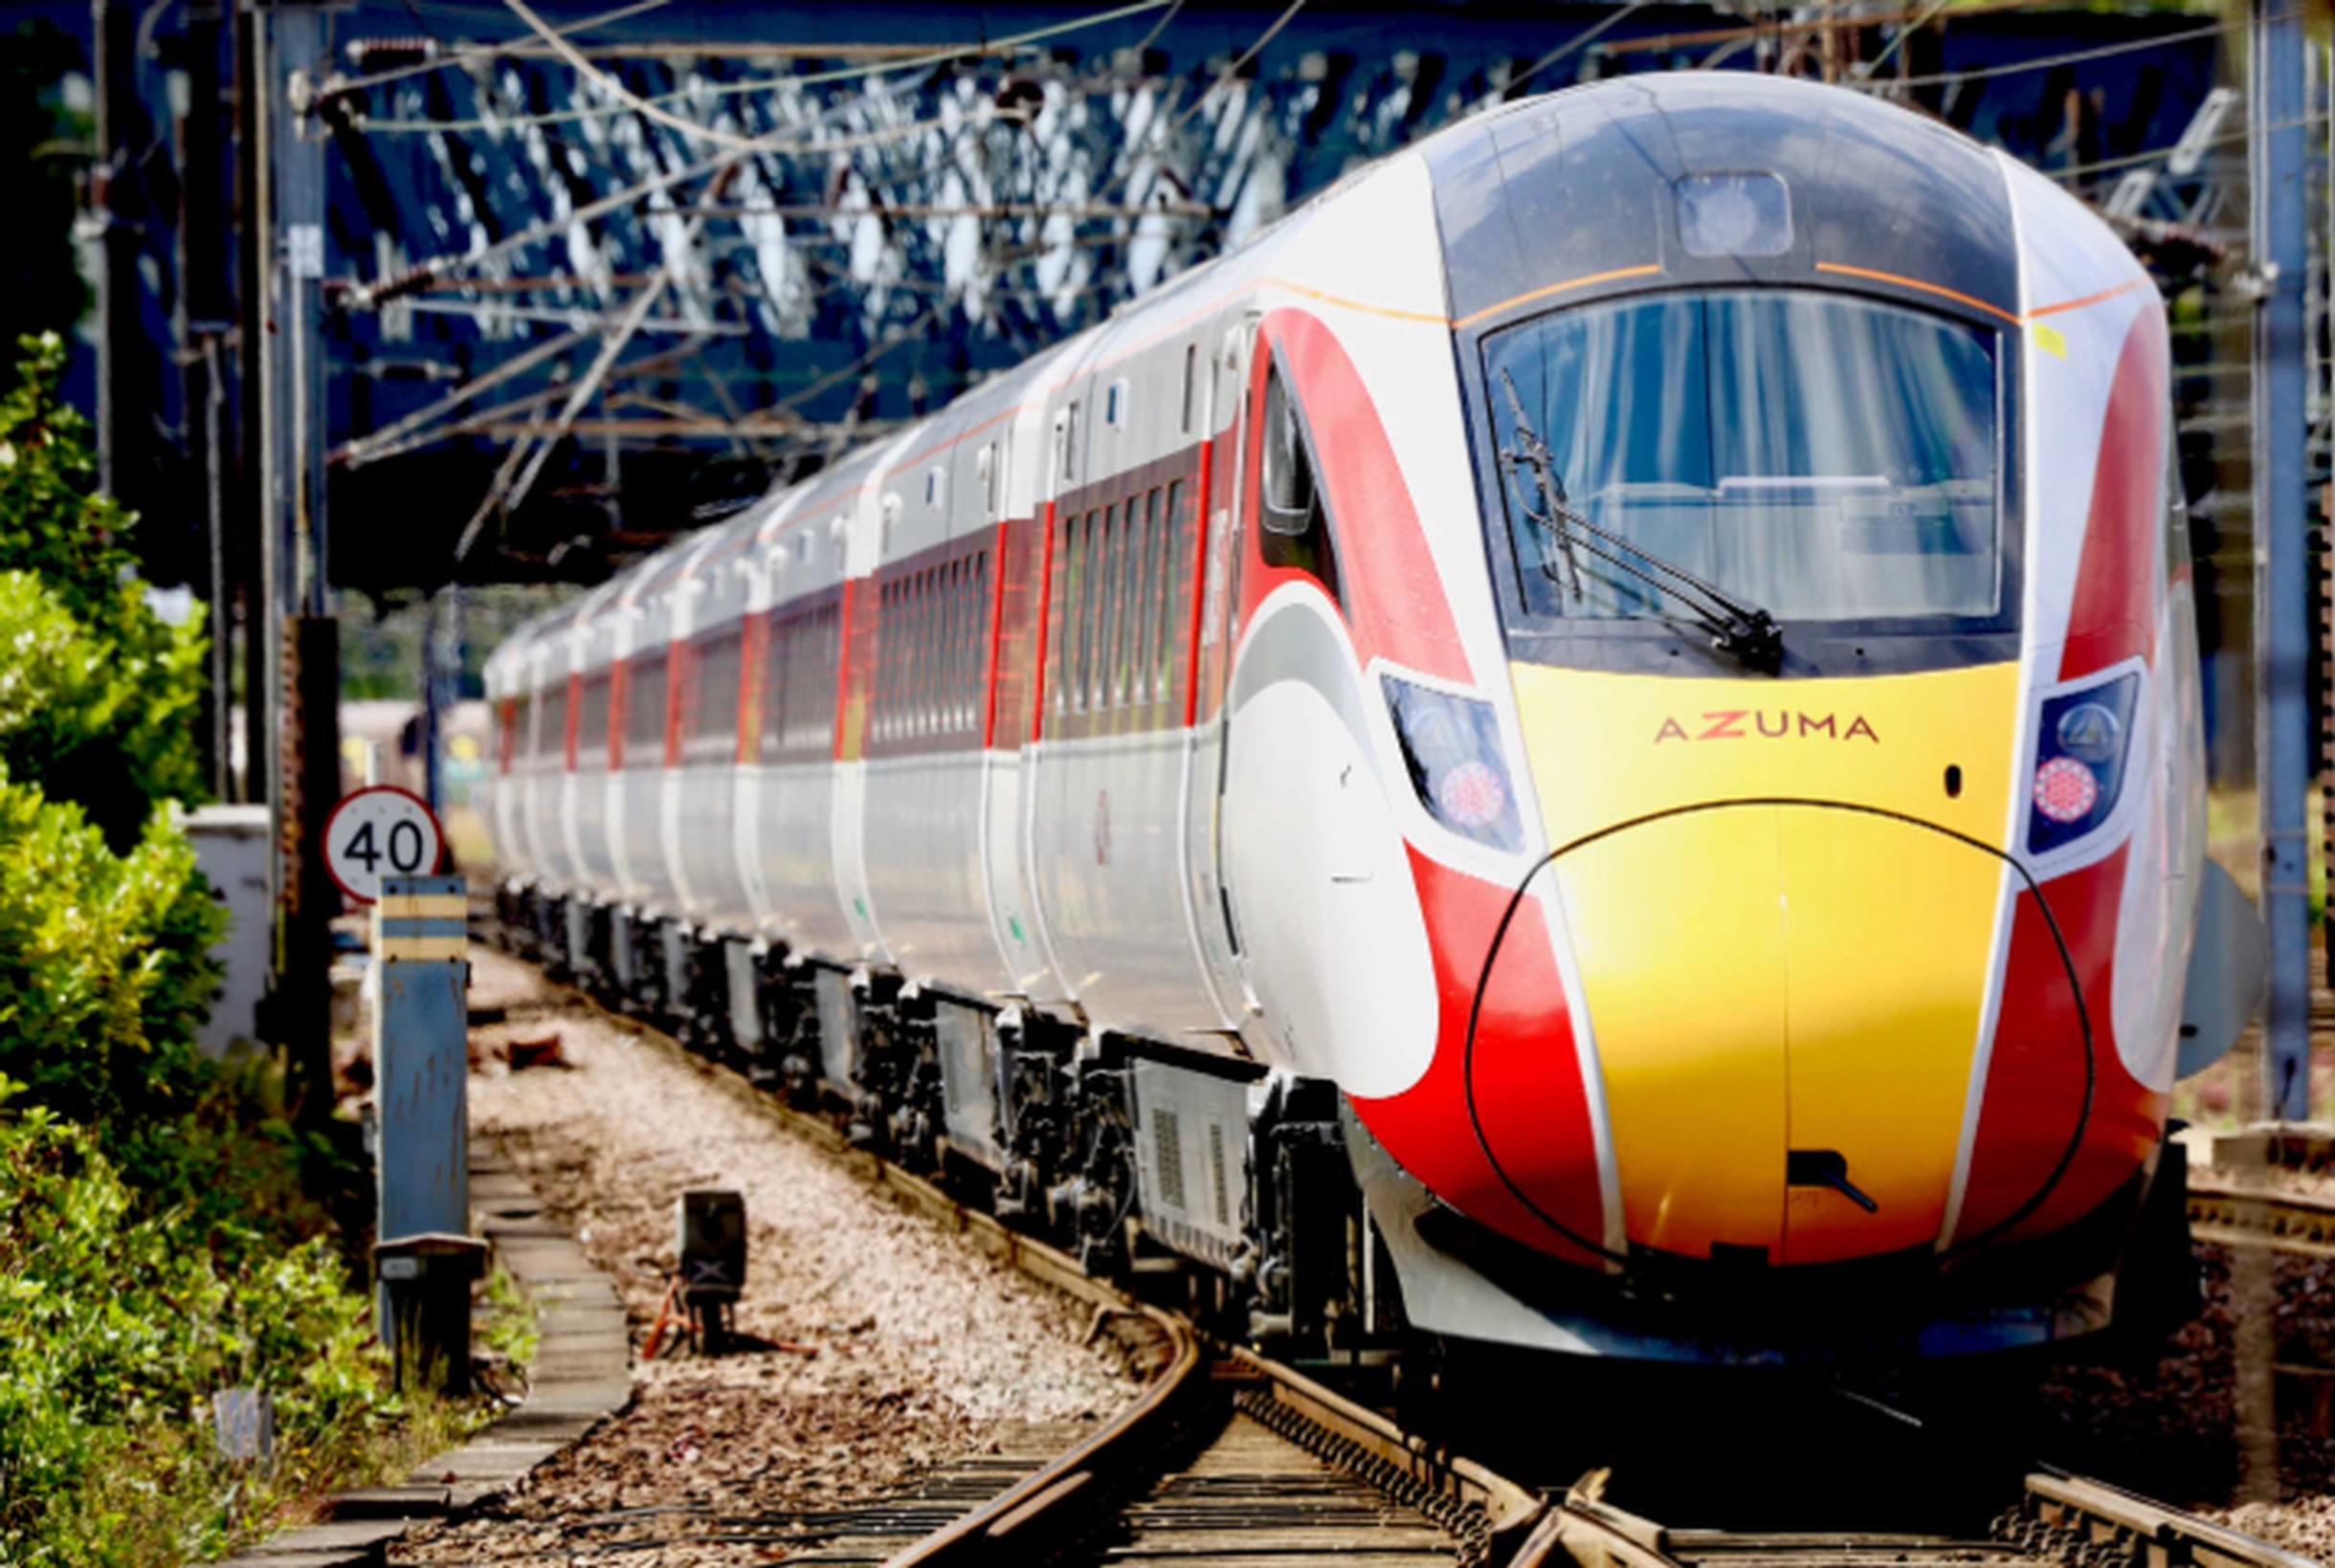 The first high speed Azuma trains entered passenger service on the LNER route in May 2019